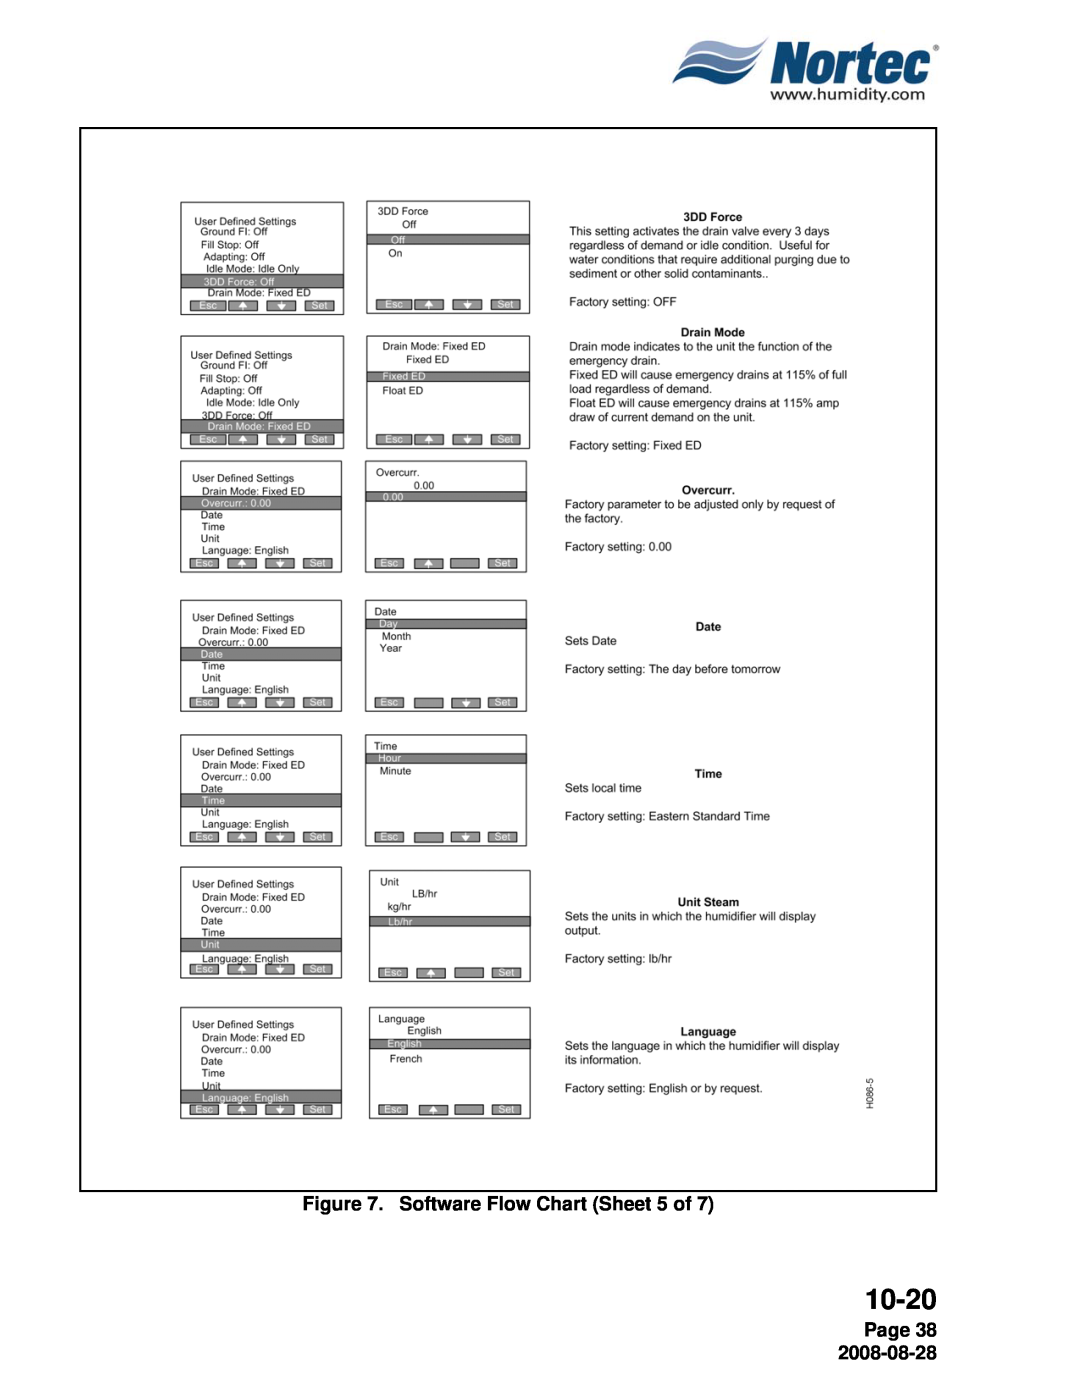 Nortec NH Series installation manual Software Flow Chart Sheet 5 of, Page 38, 10-20 